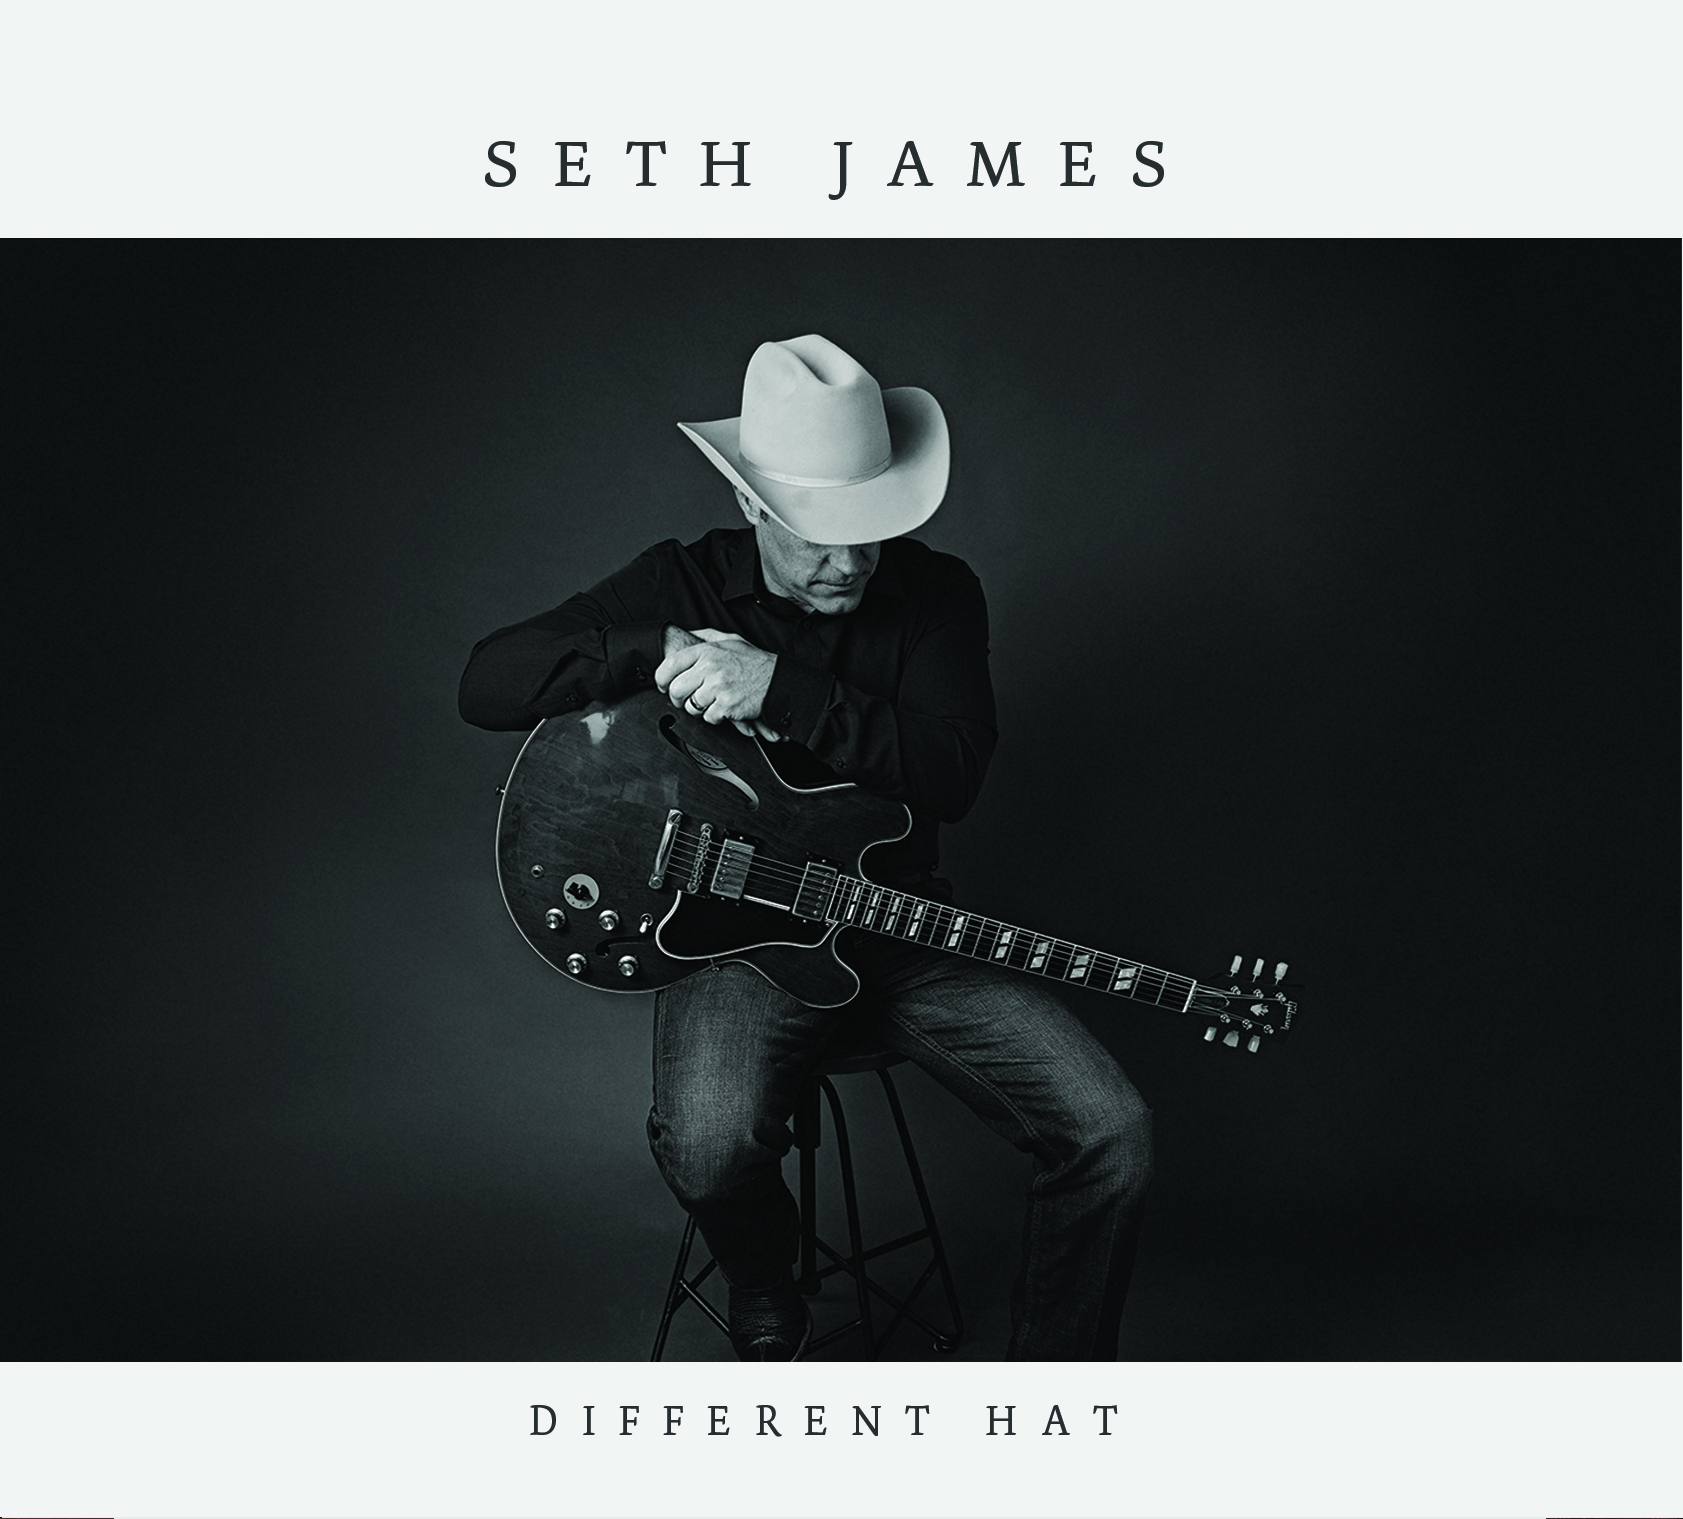 Seth James To Release New Album DIFFERENT HAT On 8/27